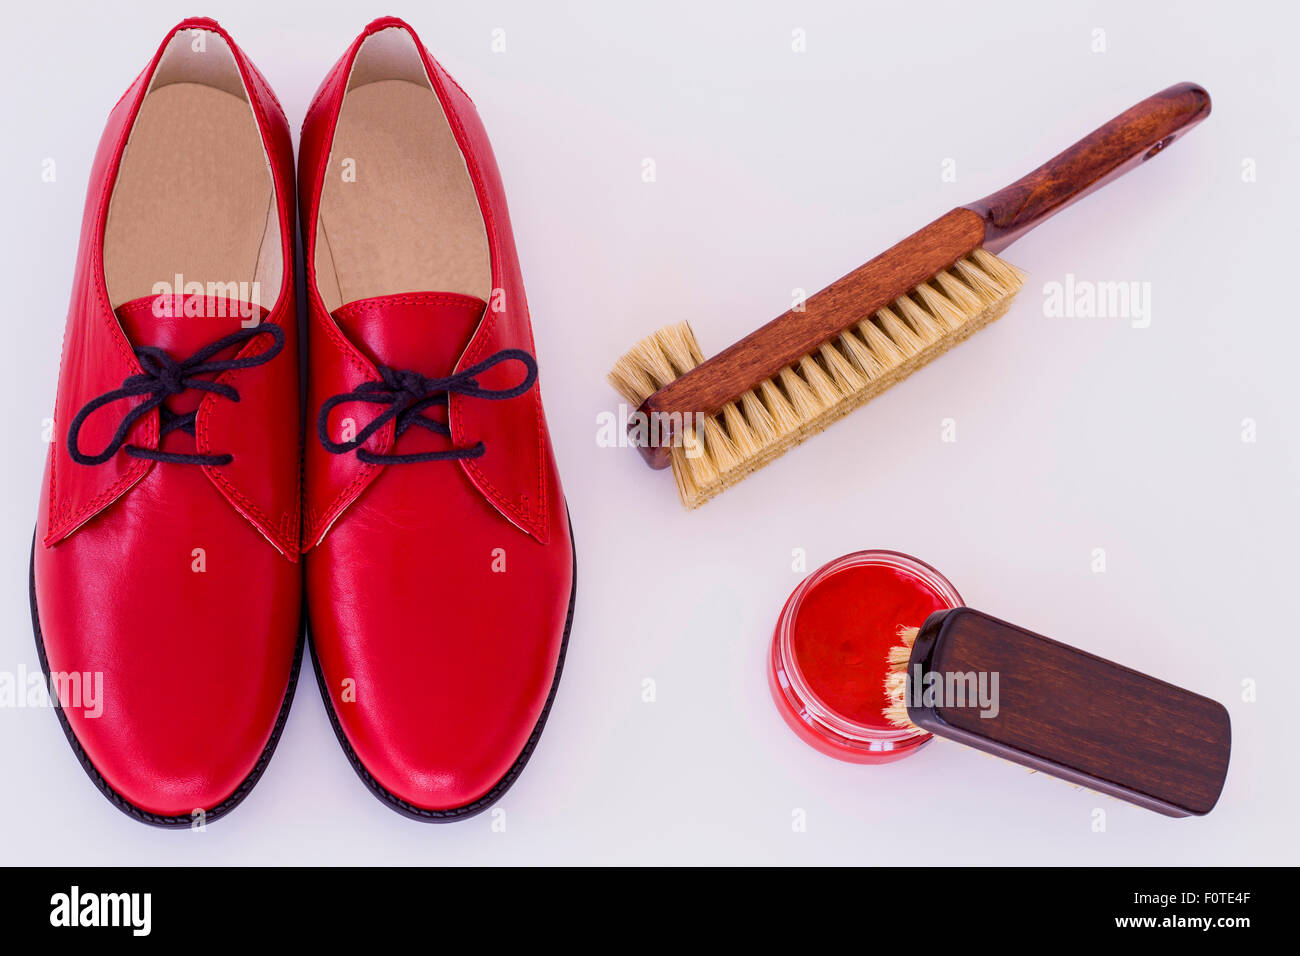 Isolated red shoes and means on care of footwear - shoe-polish and brush Stock Photo